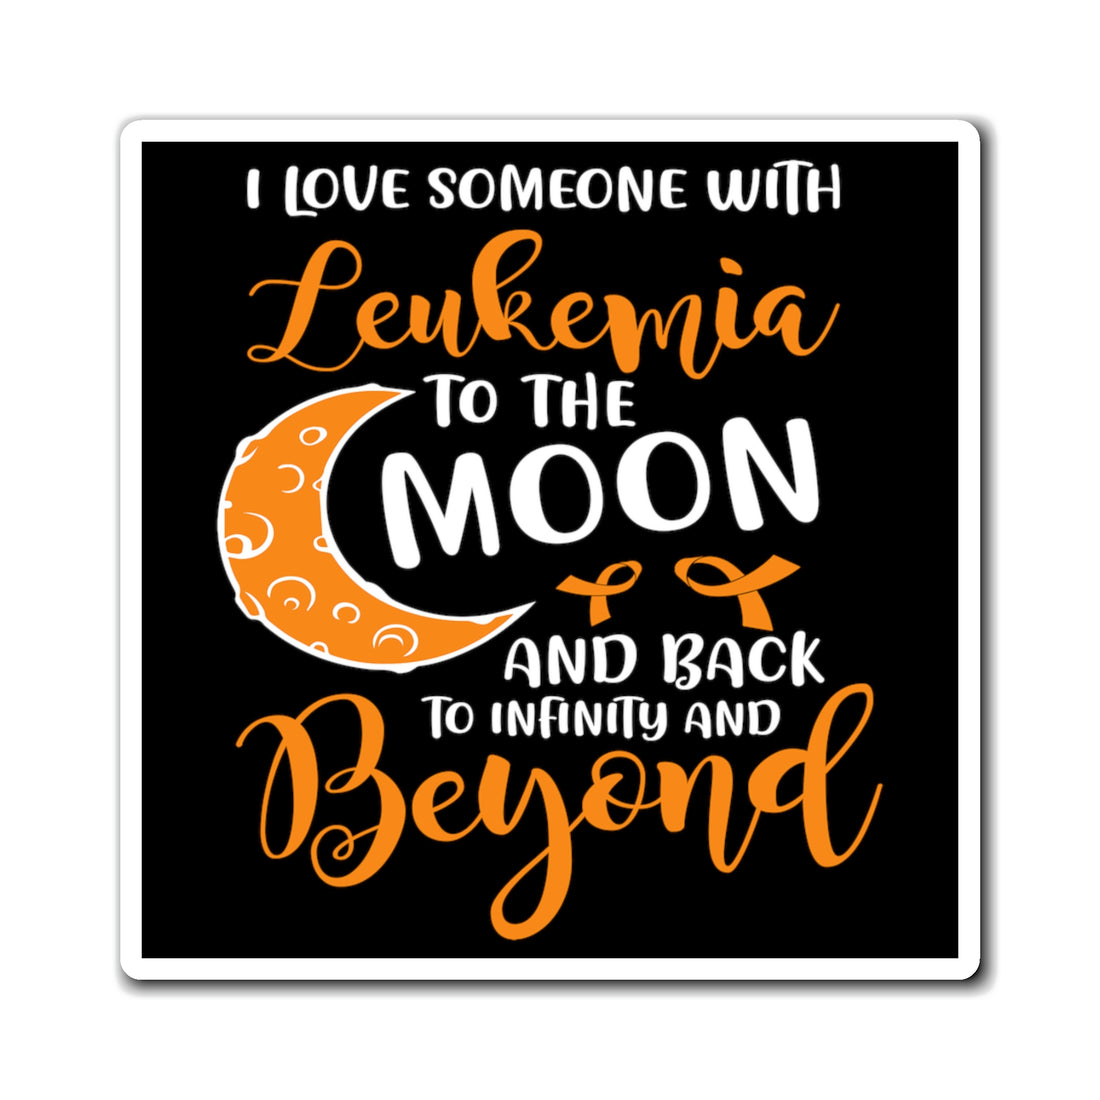 I Love Someone With Leukemia To The Moon And Back - Magnet